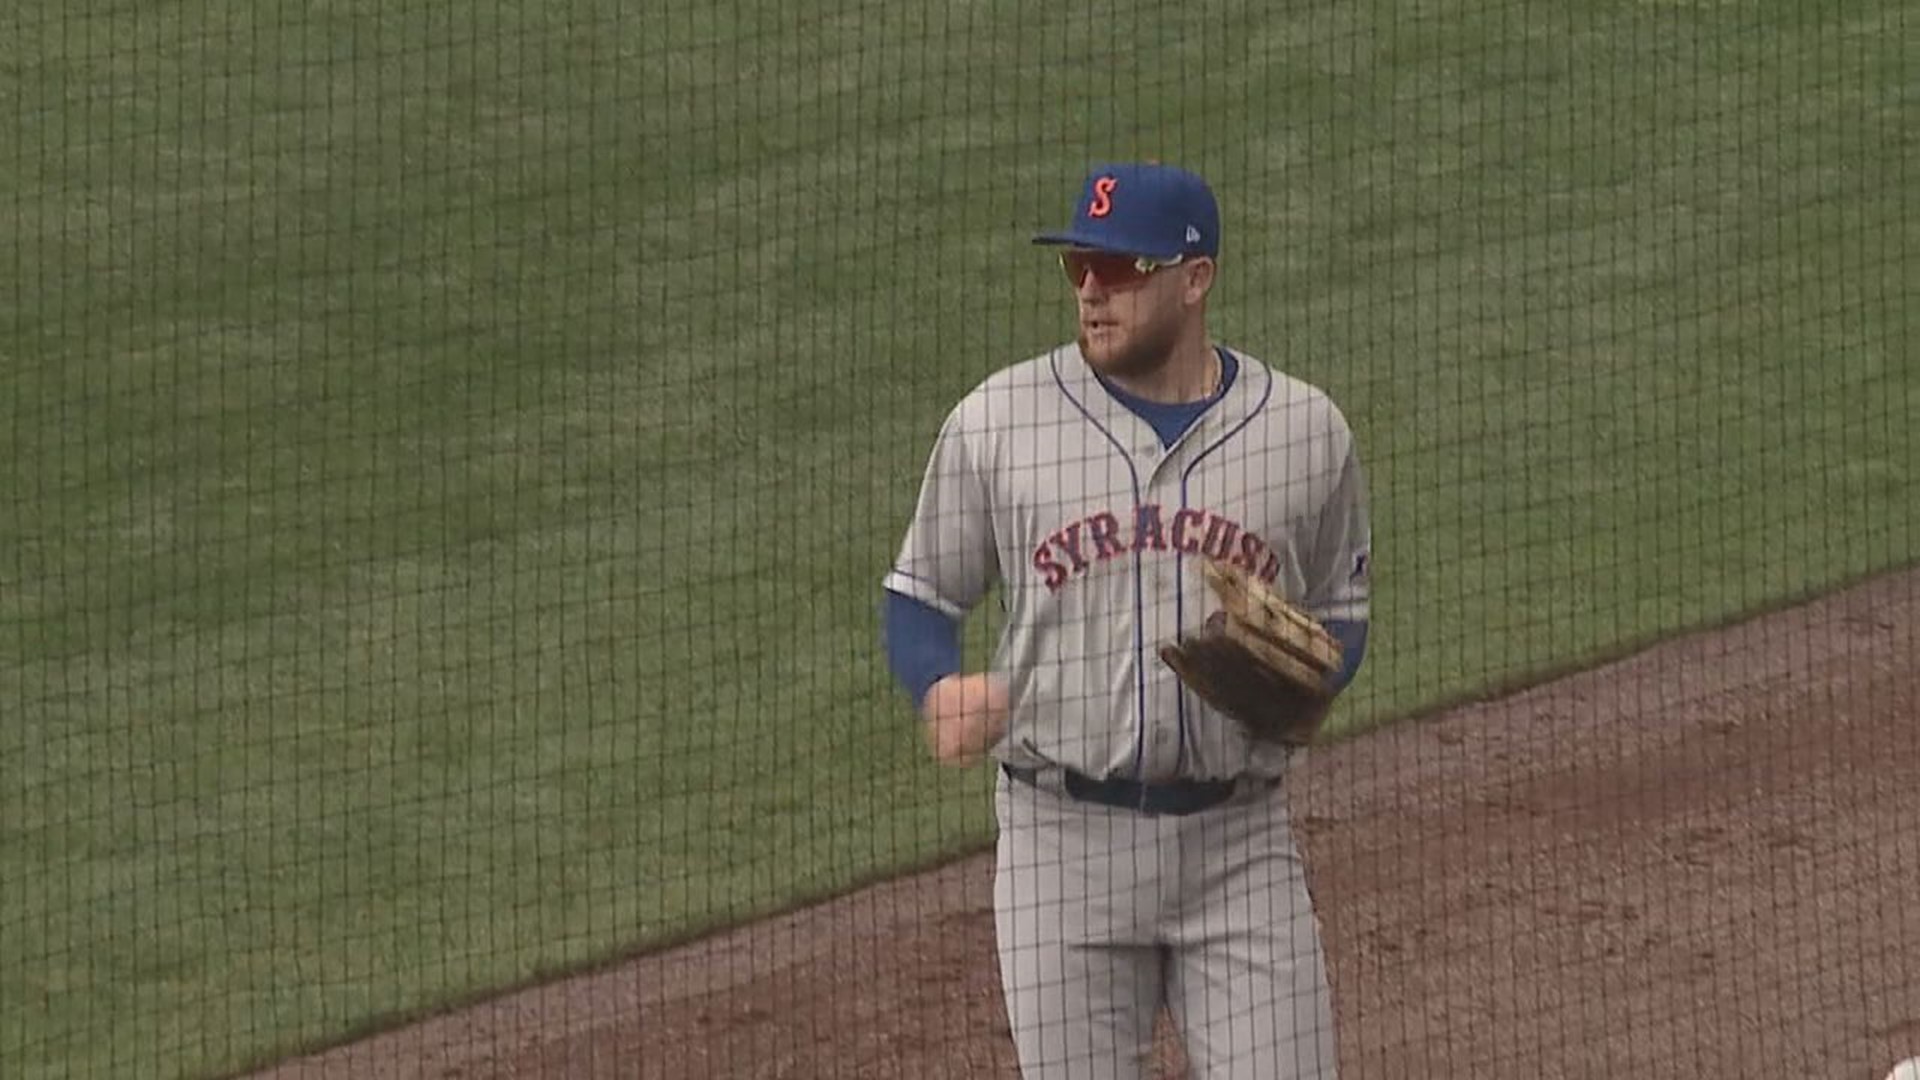 Pottsville-Native Blankenhorn Playing Well With Mets, His Fourth Team this Season